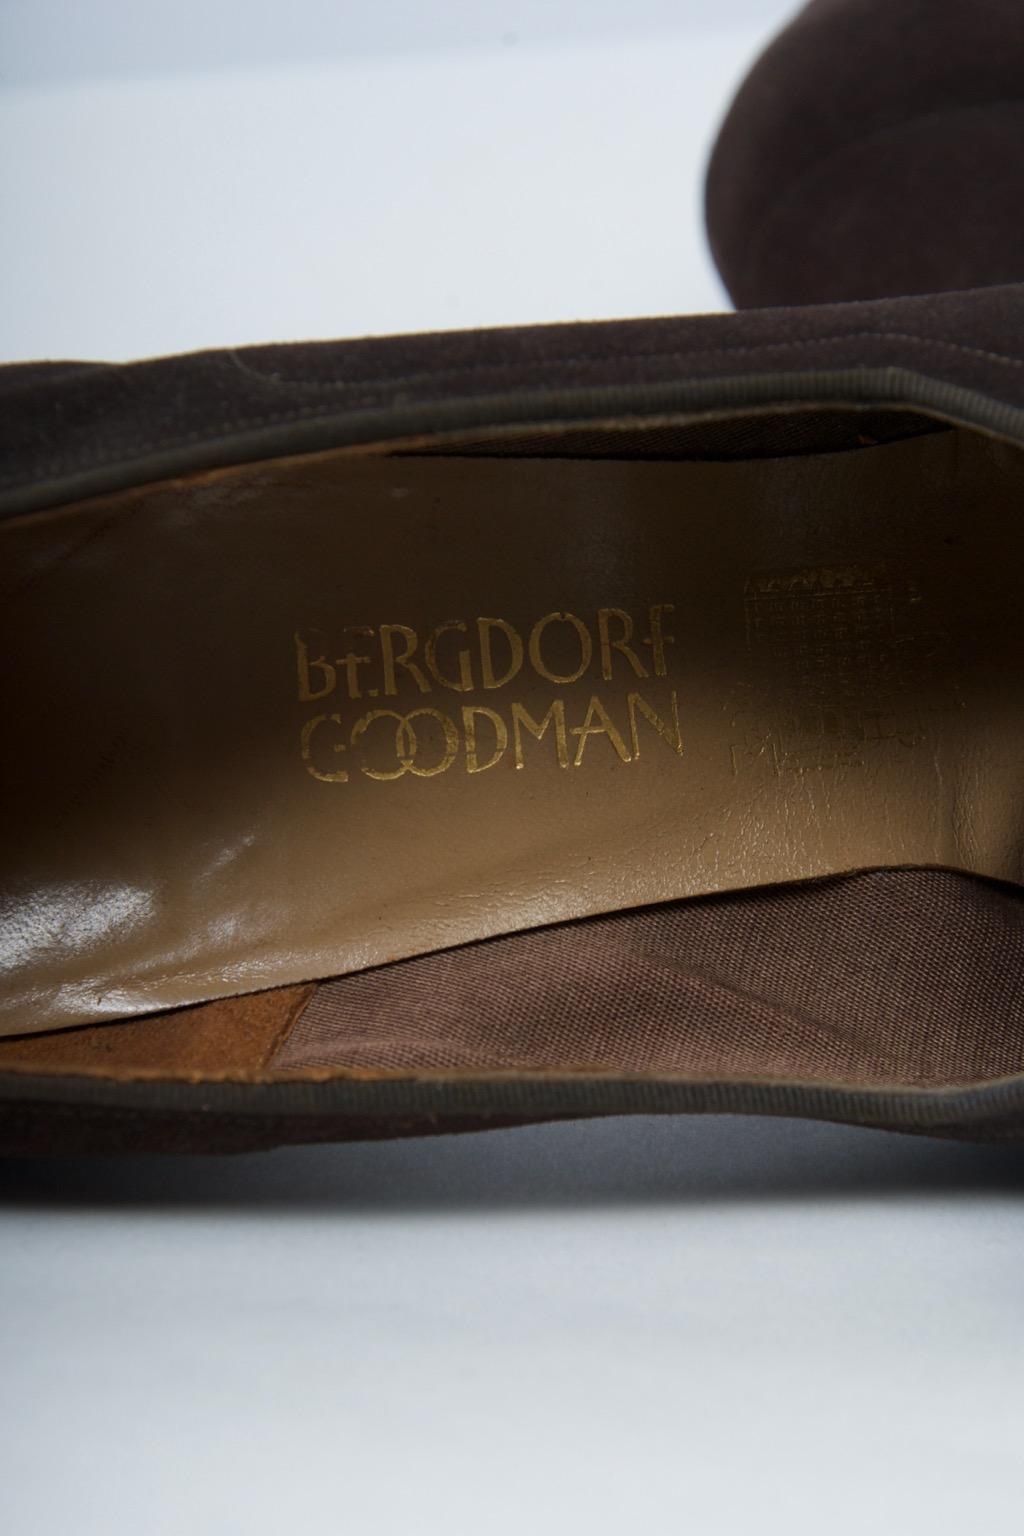 Delman Brown Suede Open-Toe Shoes, c.1950 In Good Condition For Sale In Alford, MA